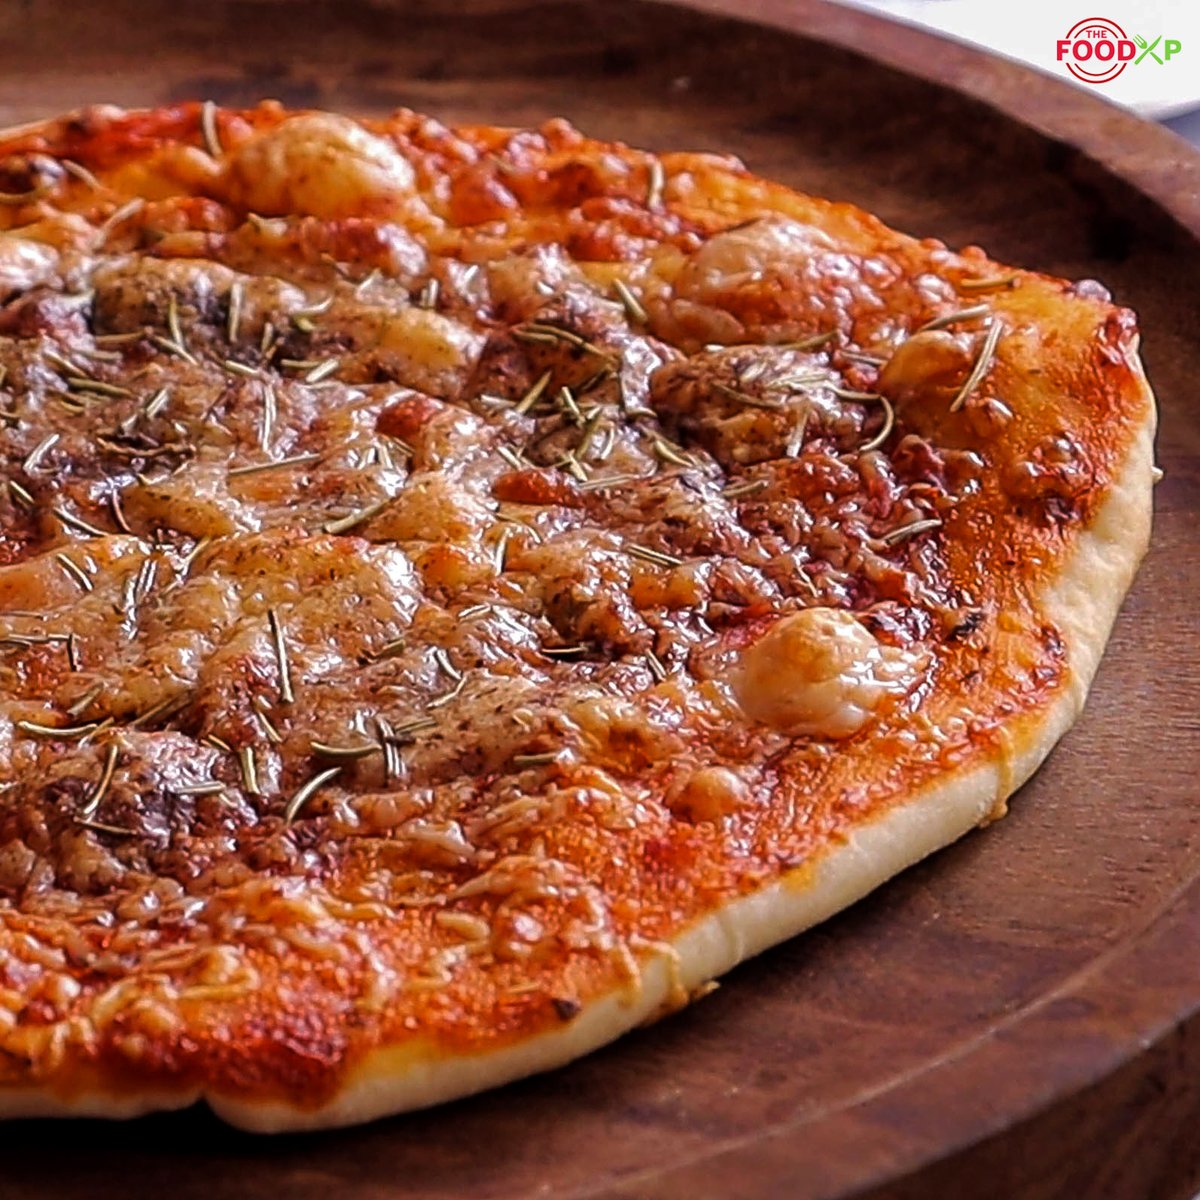 Cheese the day by making the most delicious pizza at home by trying our Gordon Ramsay style pizza recipe! Click on the link provided below to view the full recipe!
https://t.co/CIkQBRH3Da https://t.co/ERl6RY3qpm